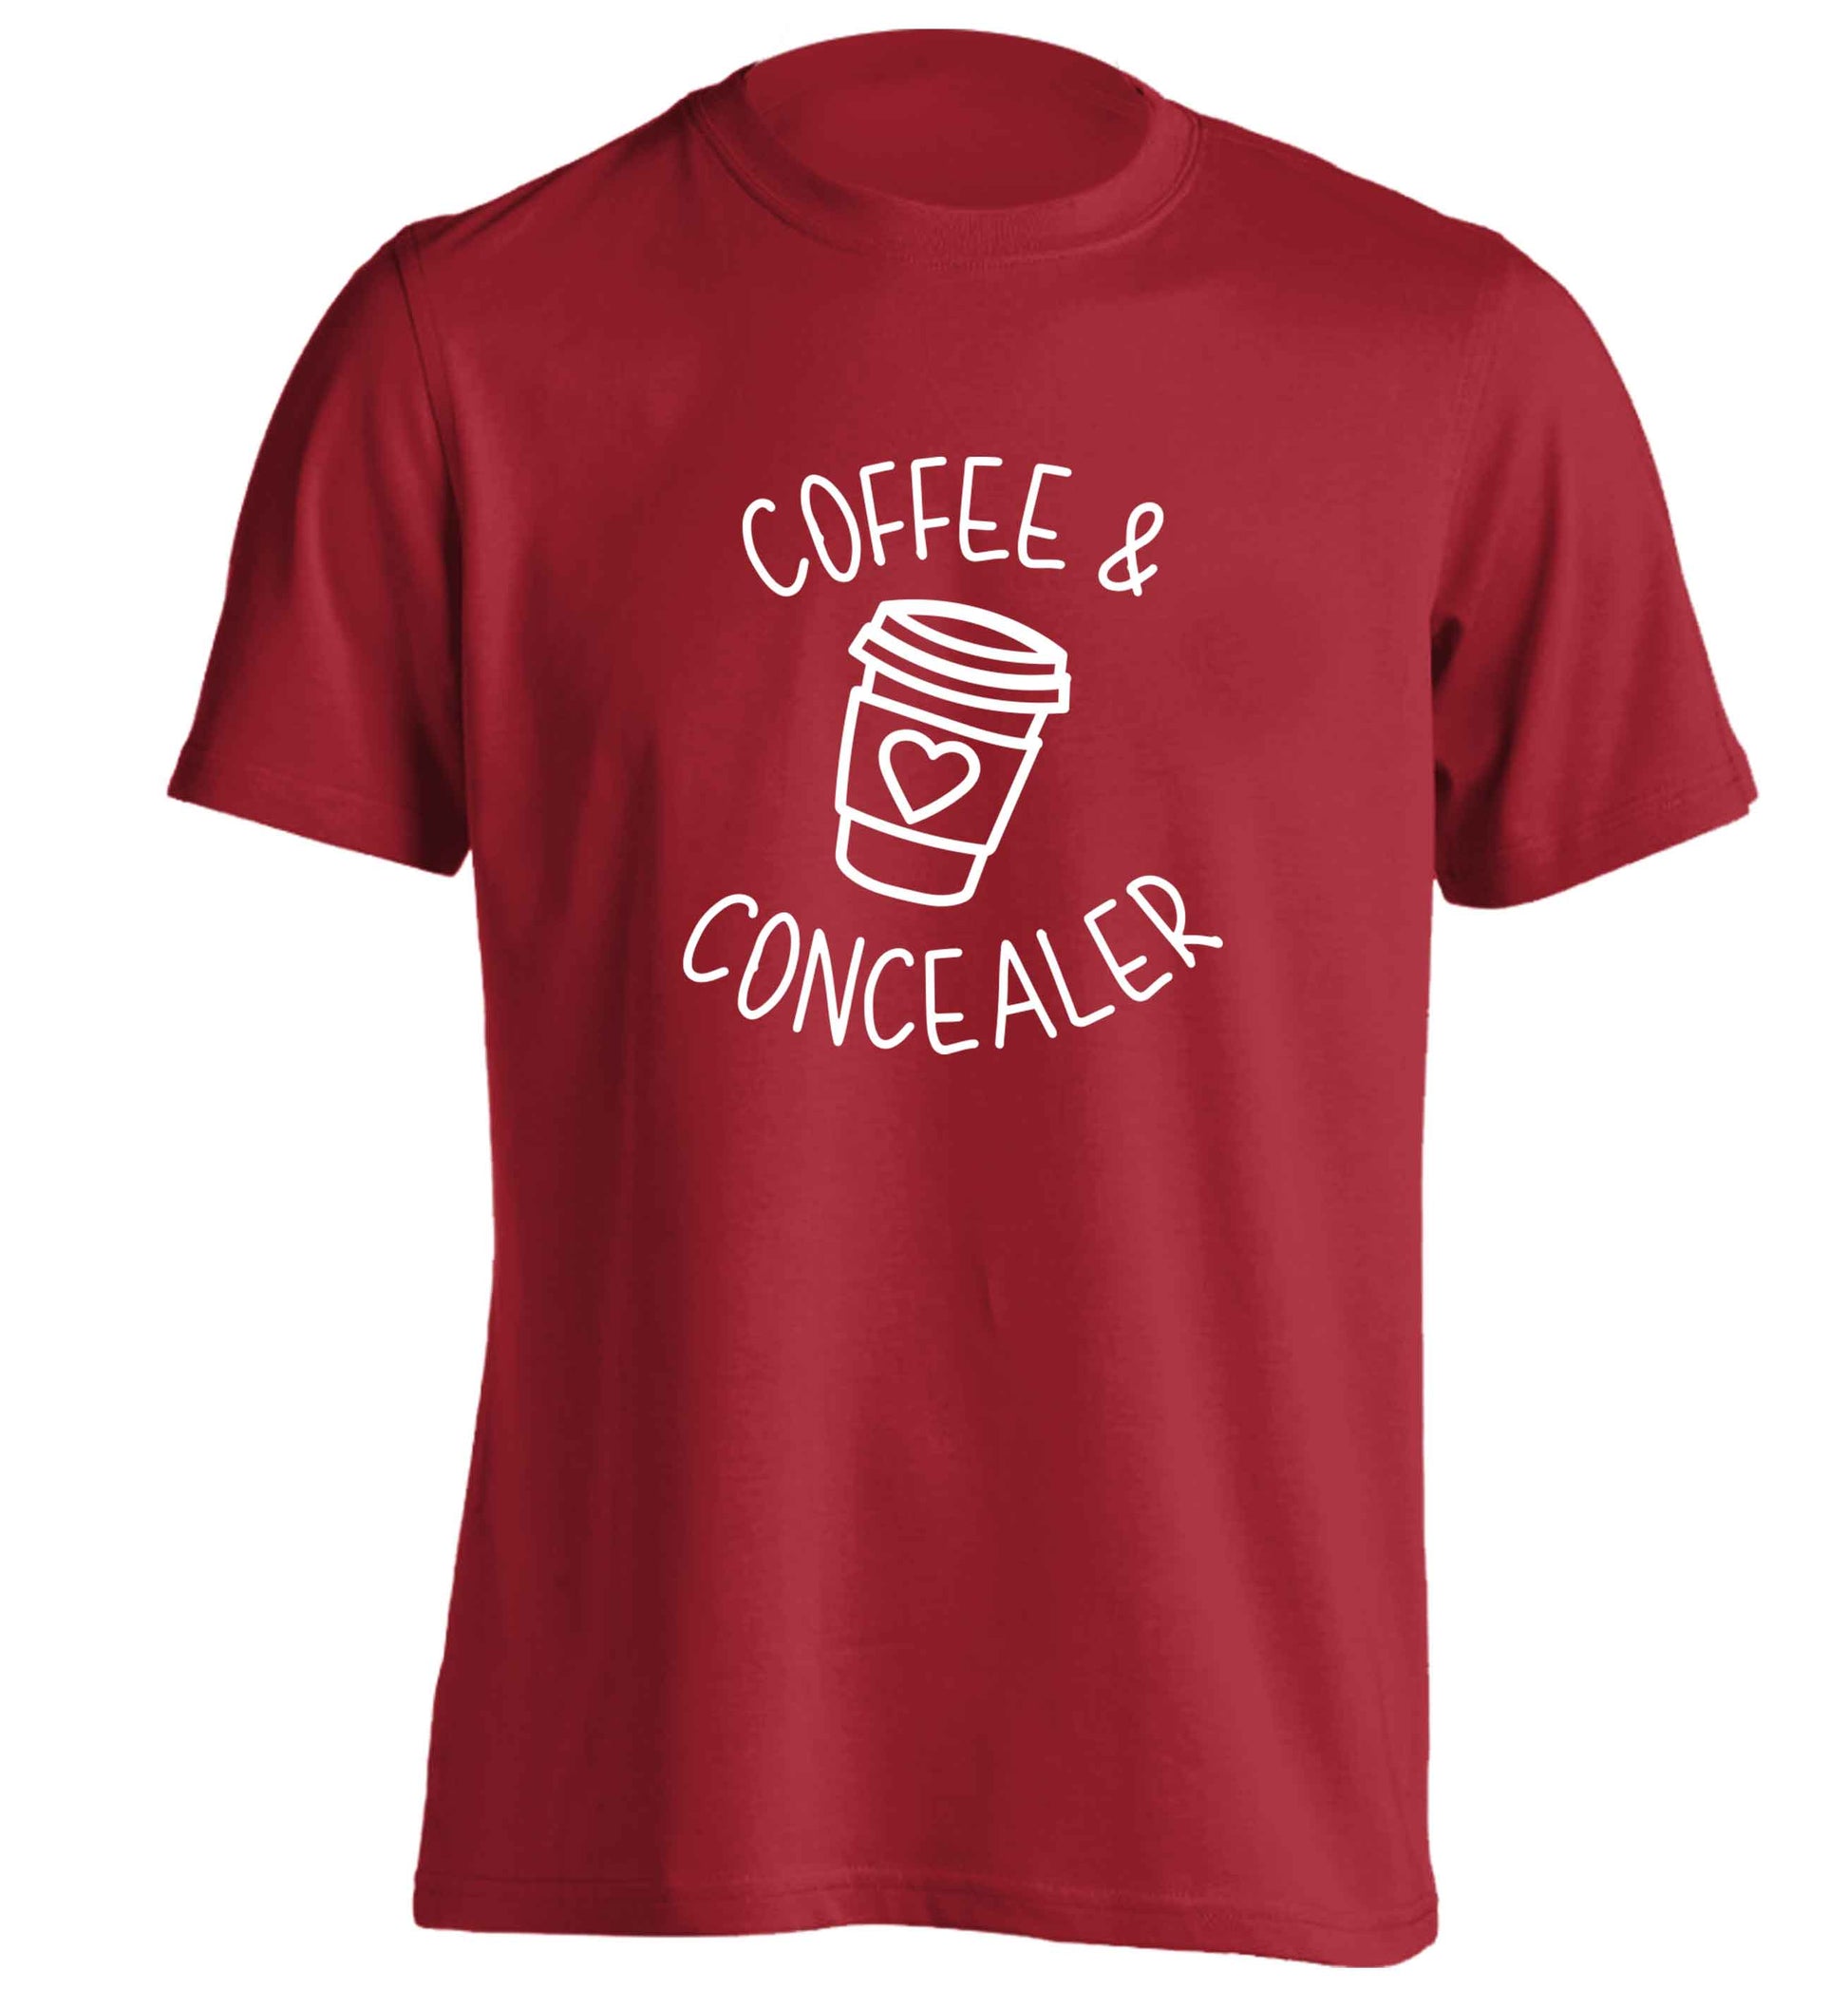 Coffee and concealer adults unisex red Tshirt 2XL